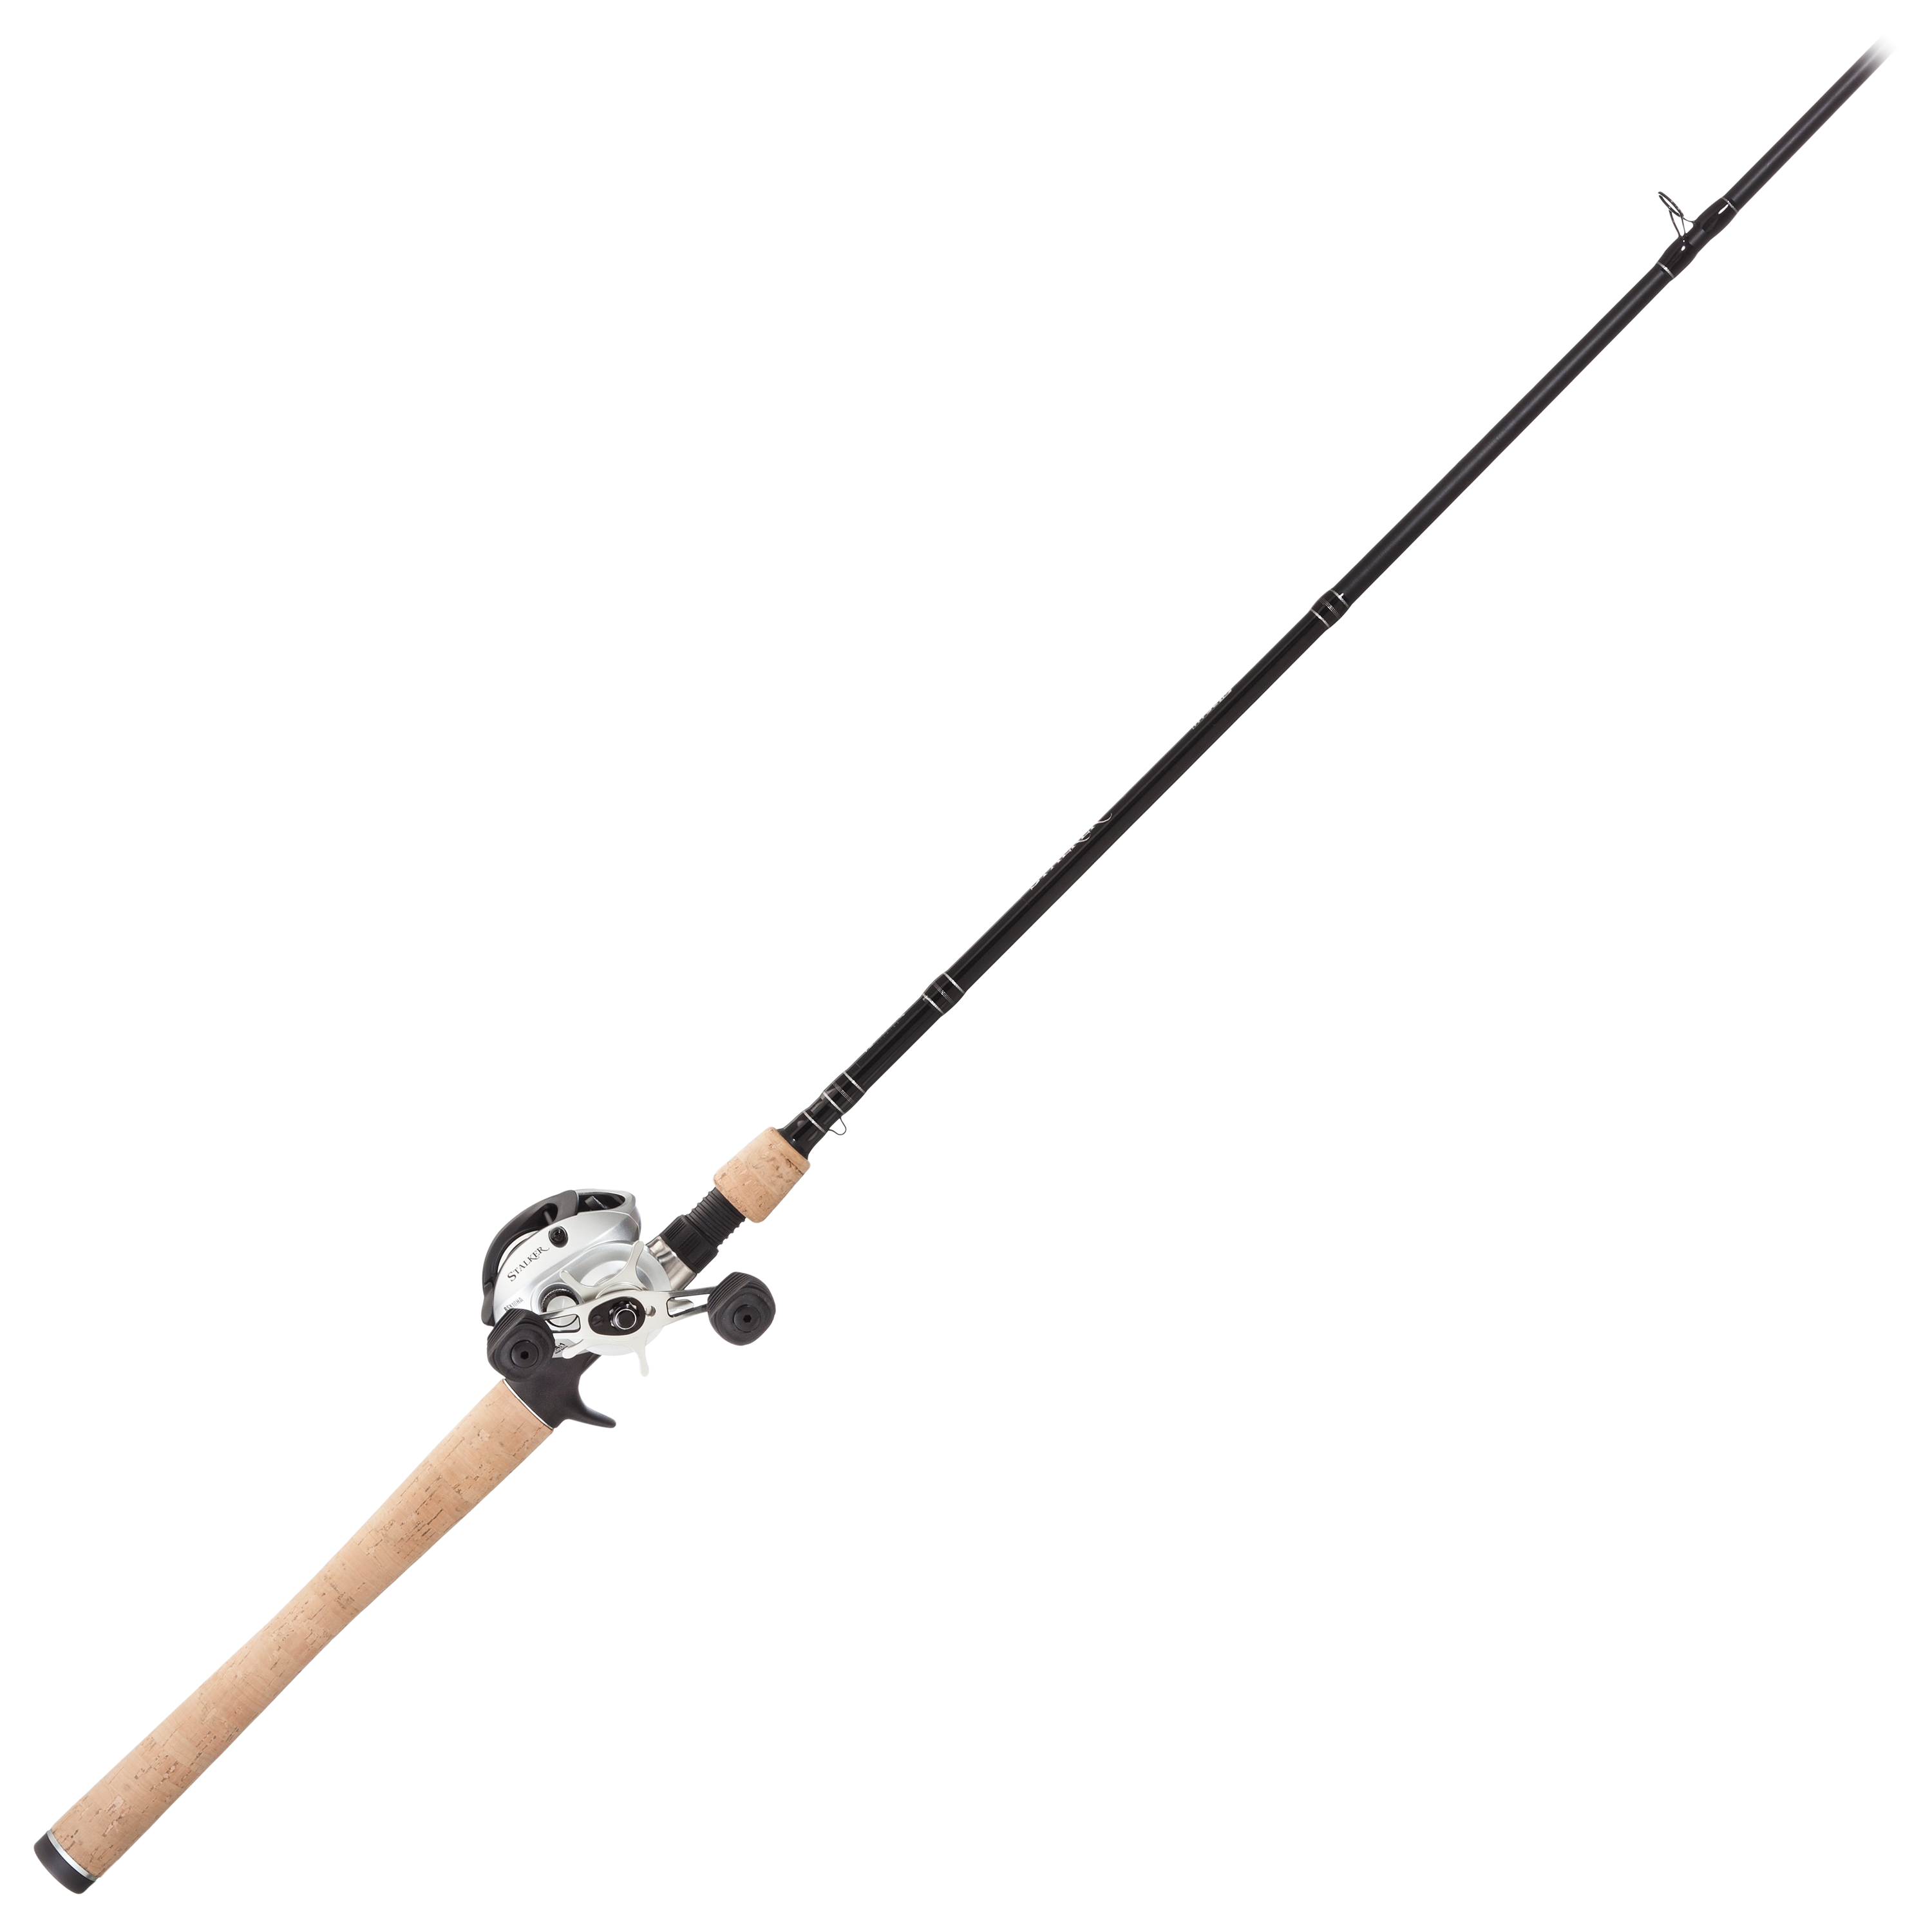 Browning Fishing Stalker Baitcast Rod and Reel Combo